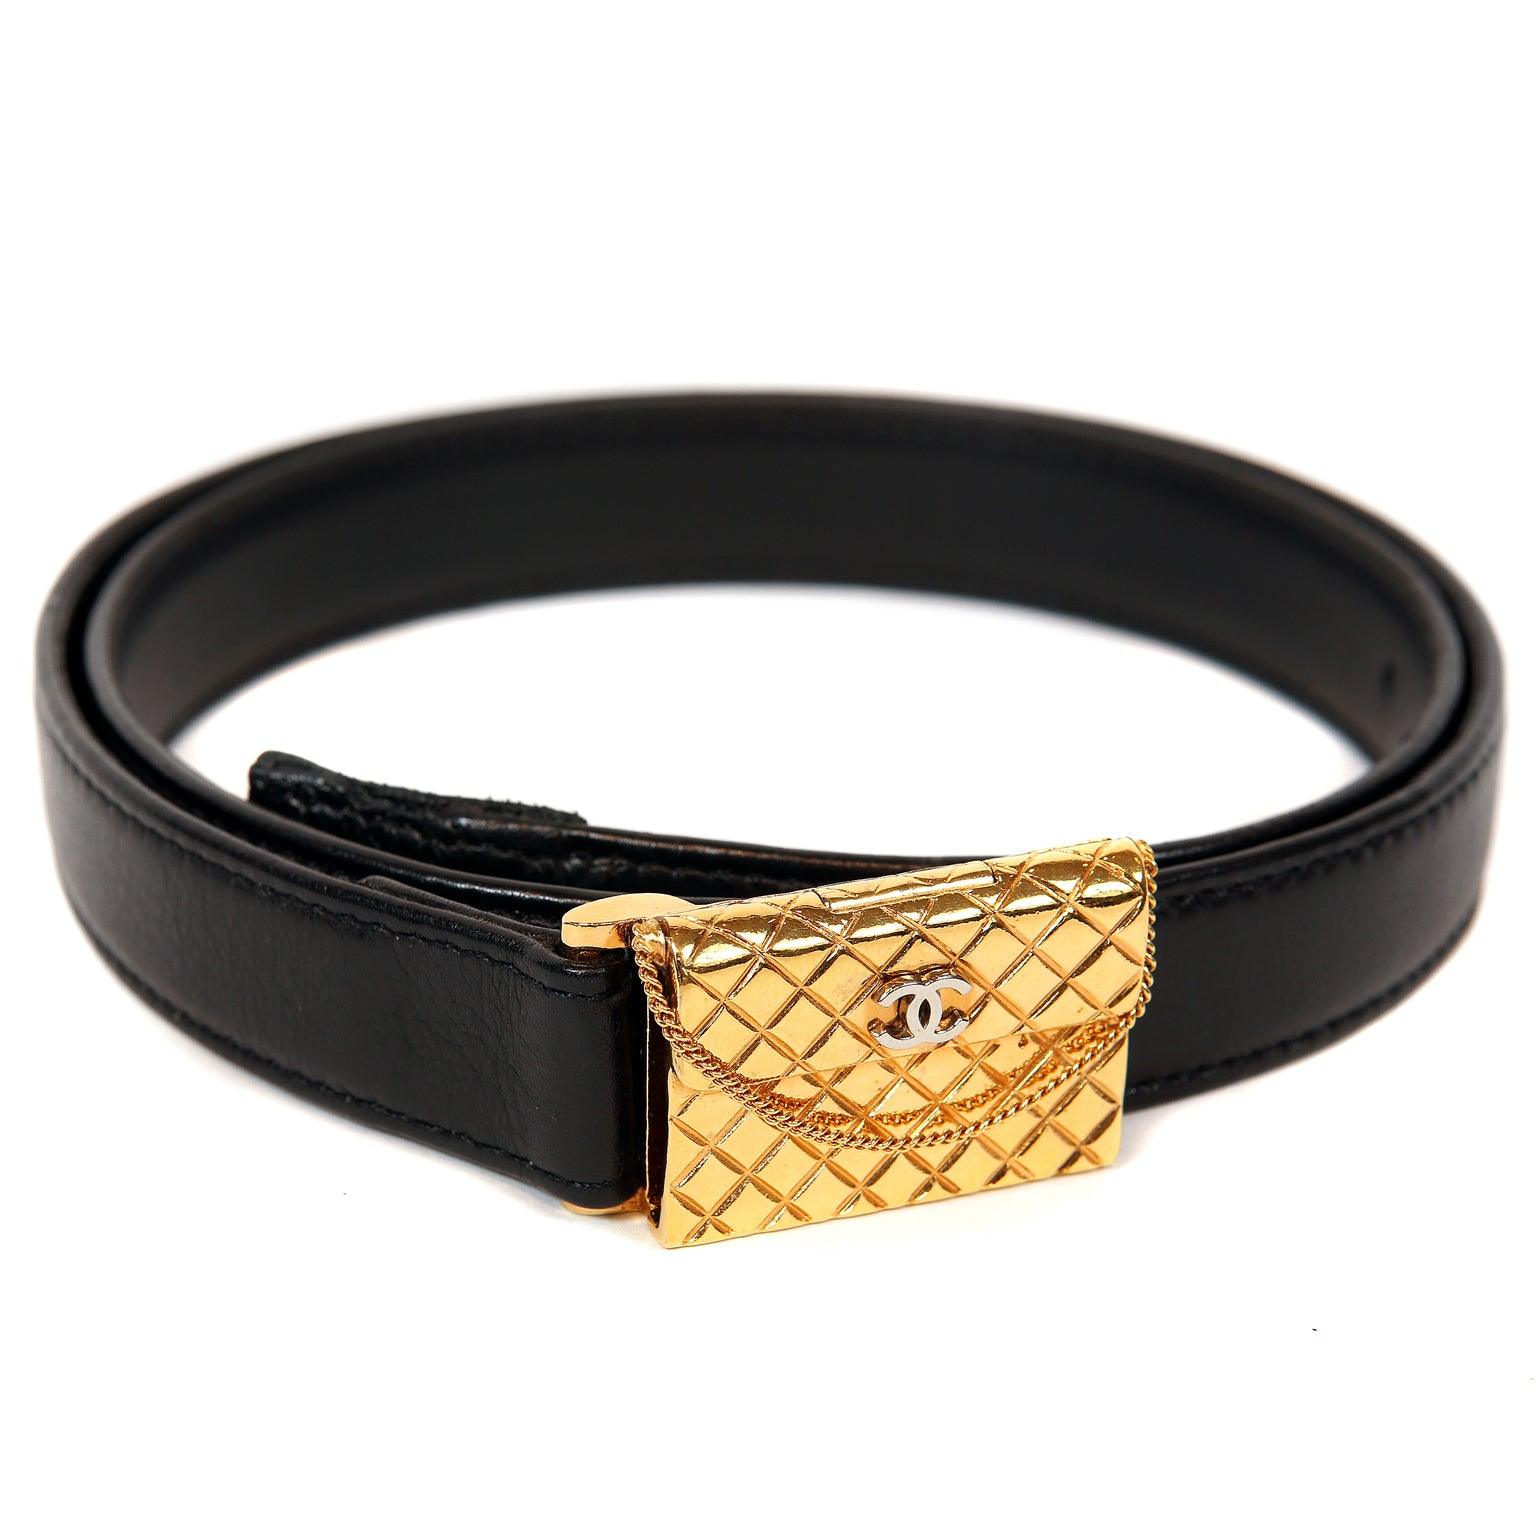 Chanel Black Leather Quilted Handbag Buckle Belt – Only Authentics